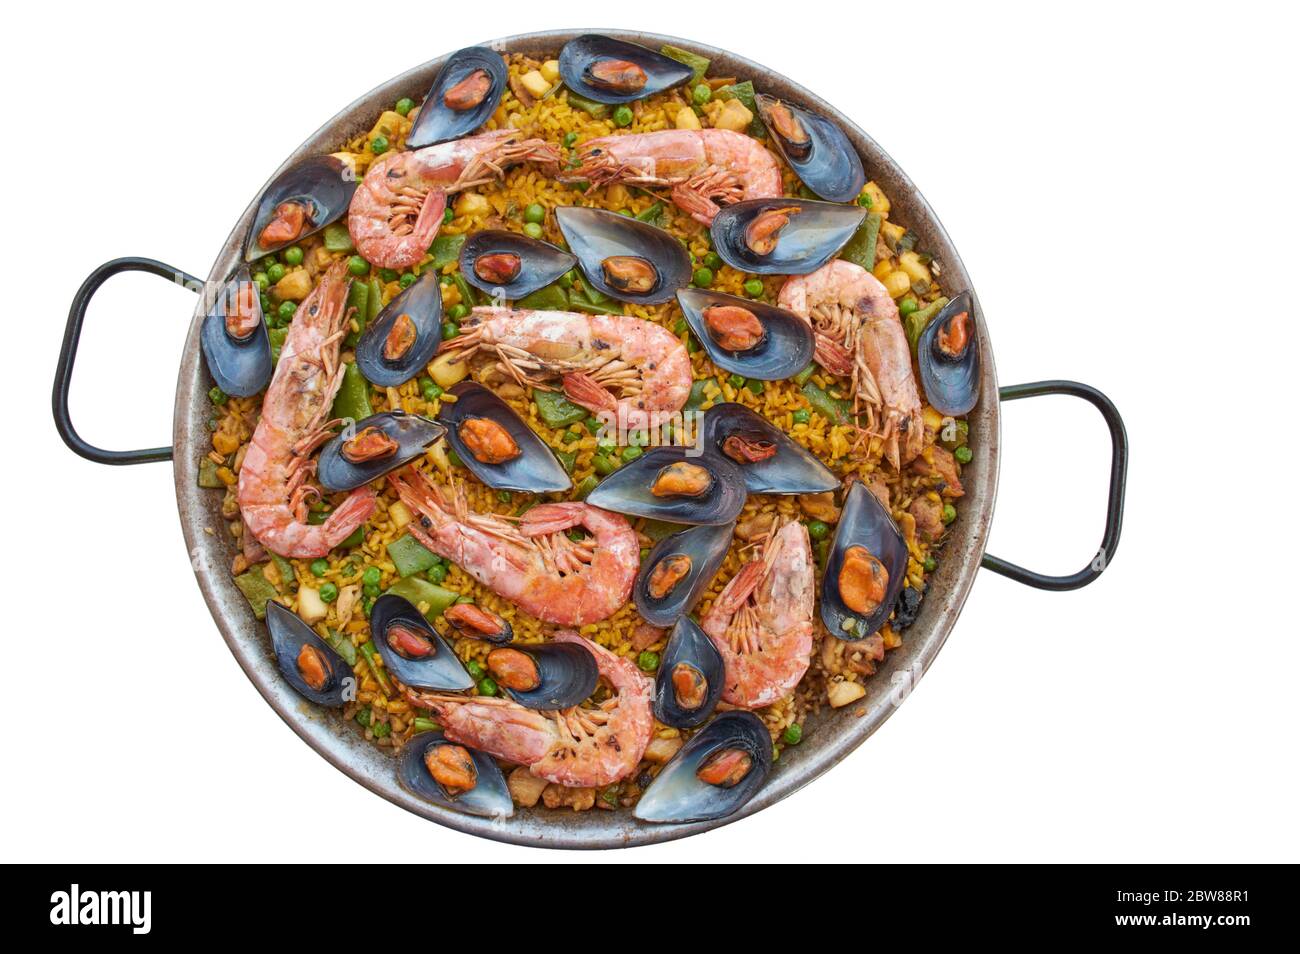 transparency cut, white background, paella typical Spanish food, with seafood vegetable meat, and rice Stock Photo